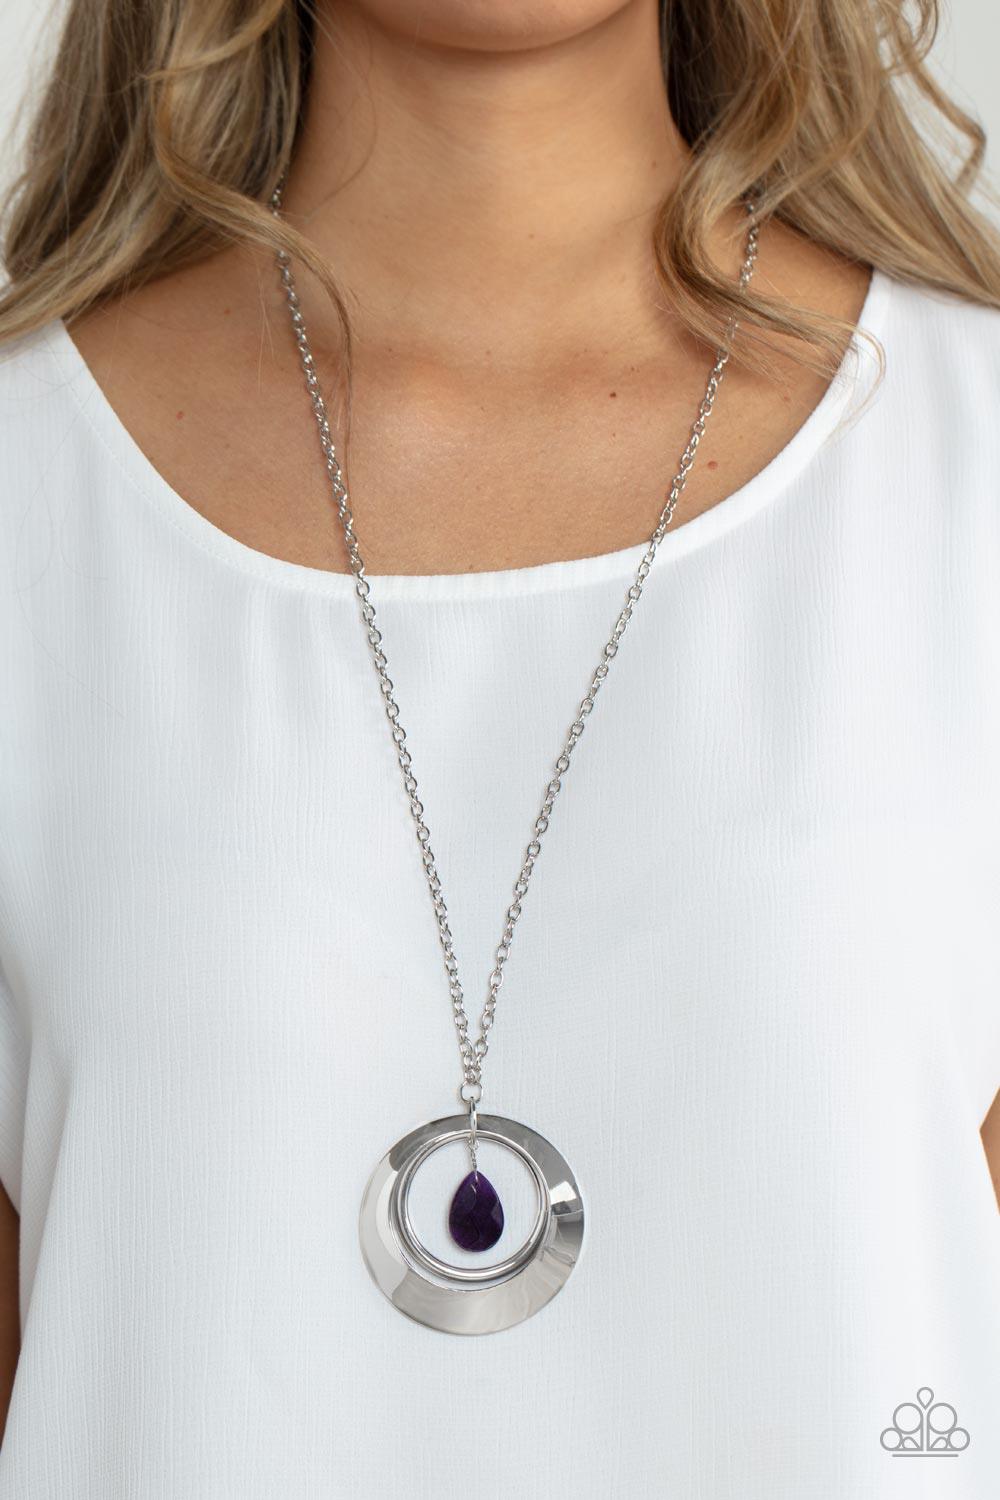 Inner Tranquility Purple Necklace - Jewelry by Bretta